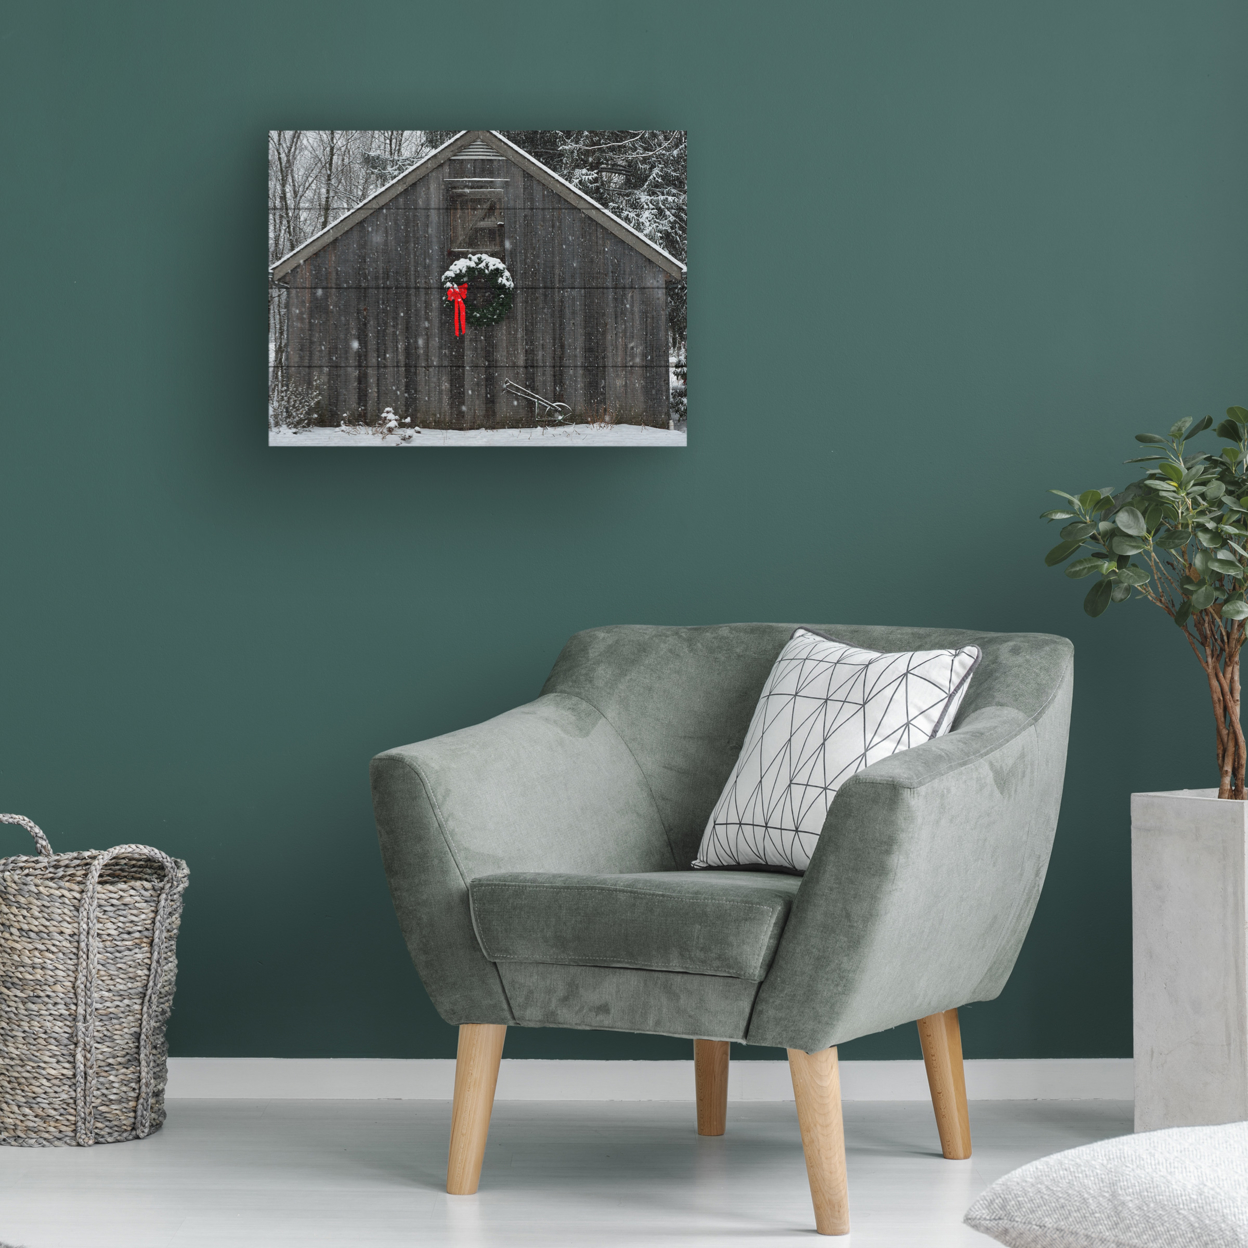 Wall Art 12 X 16 Inches Titled Christmas Barn In The Snow Ready To Hang Printed On Wooden Planks